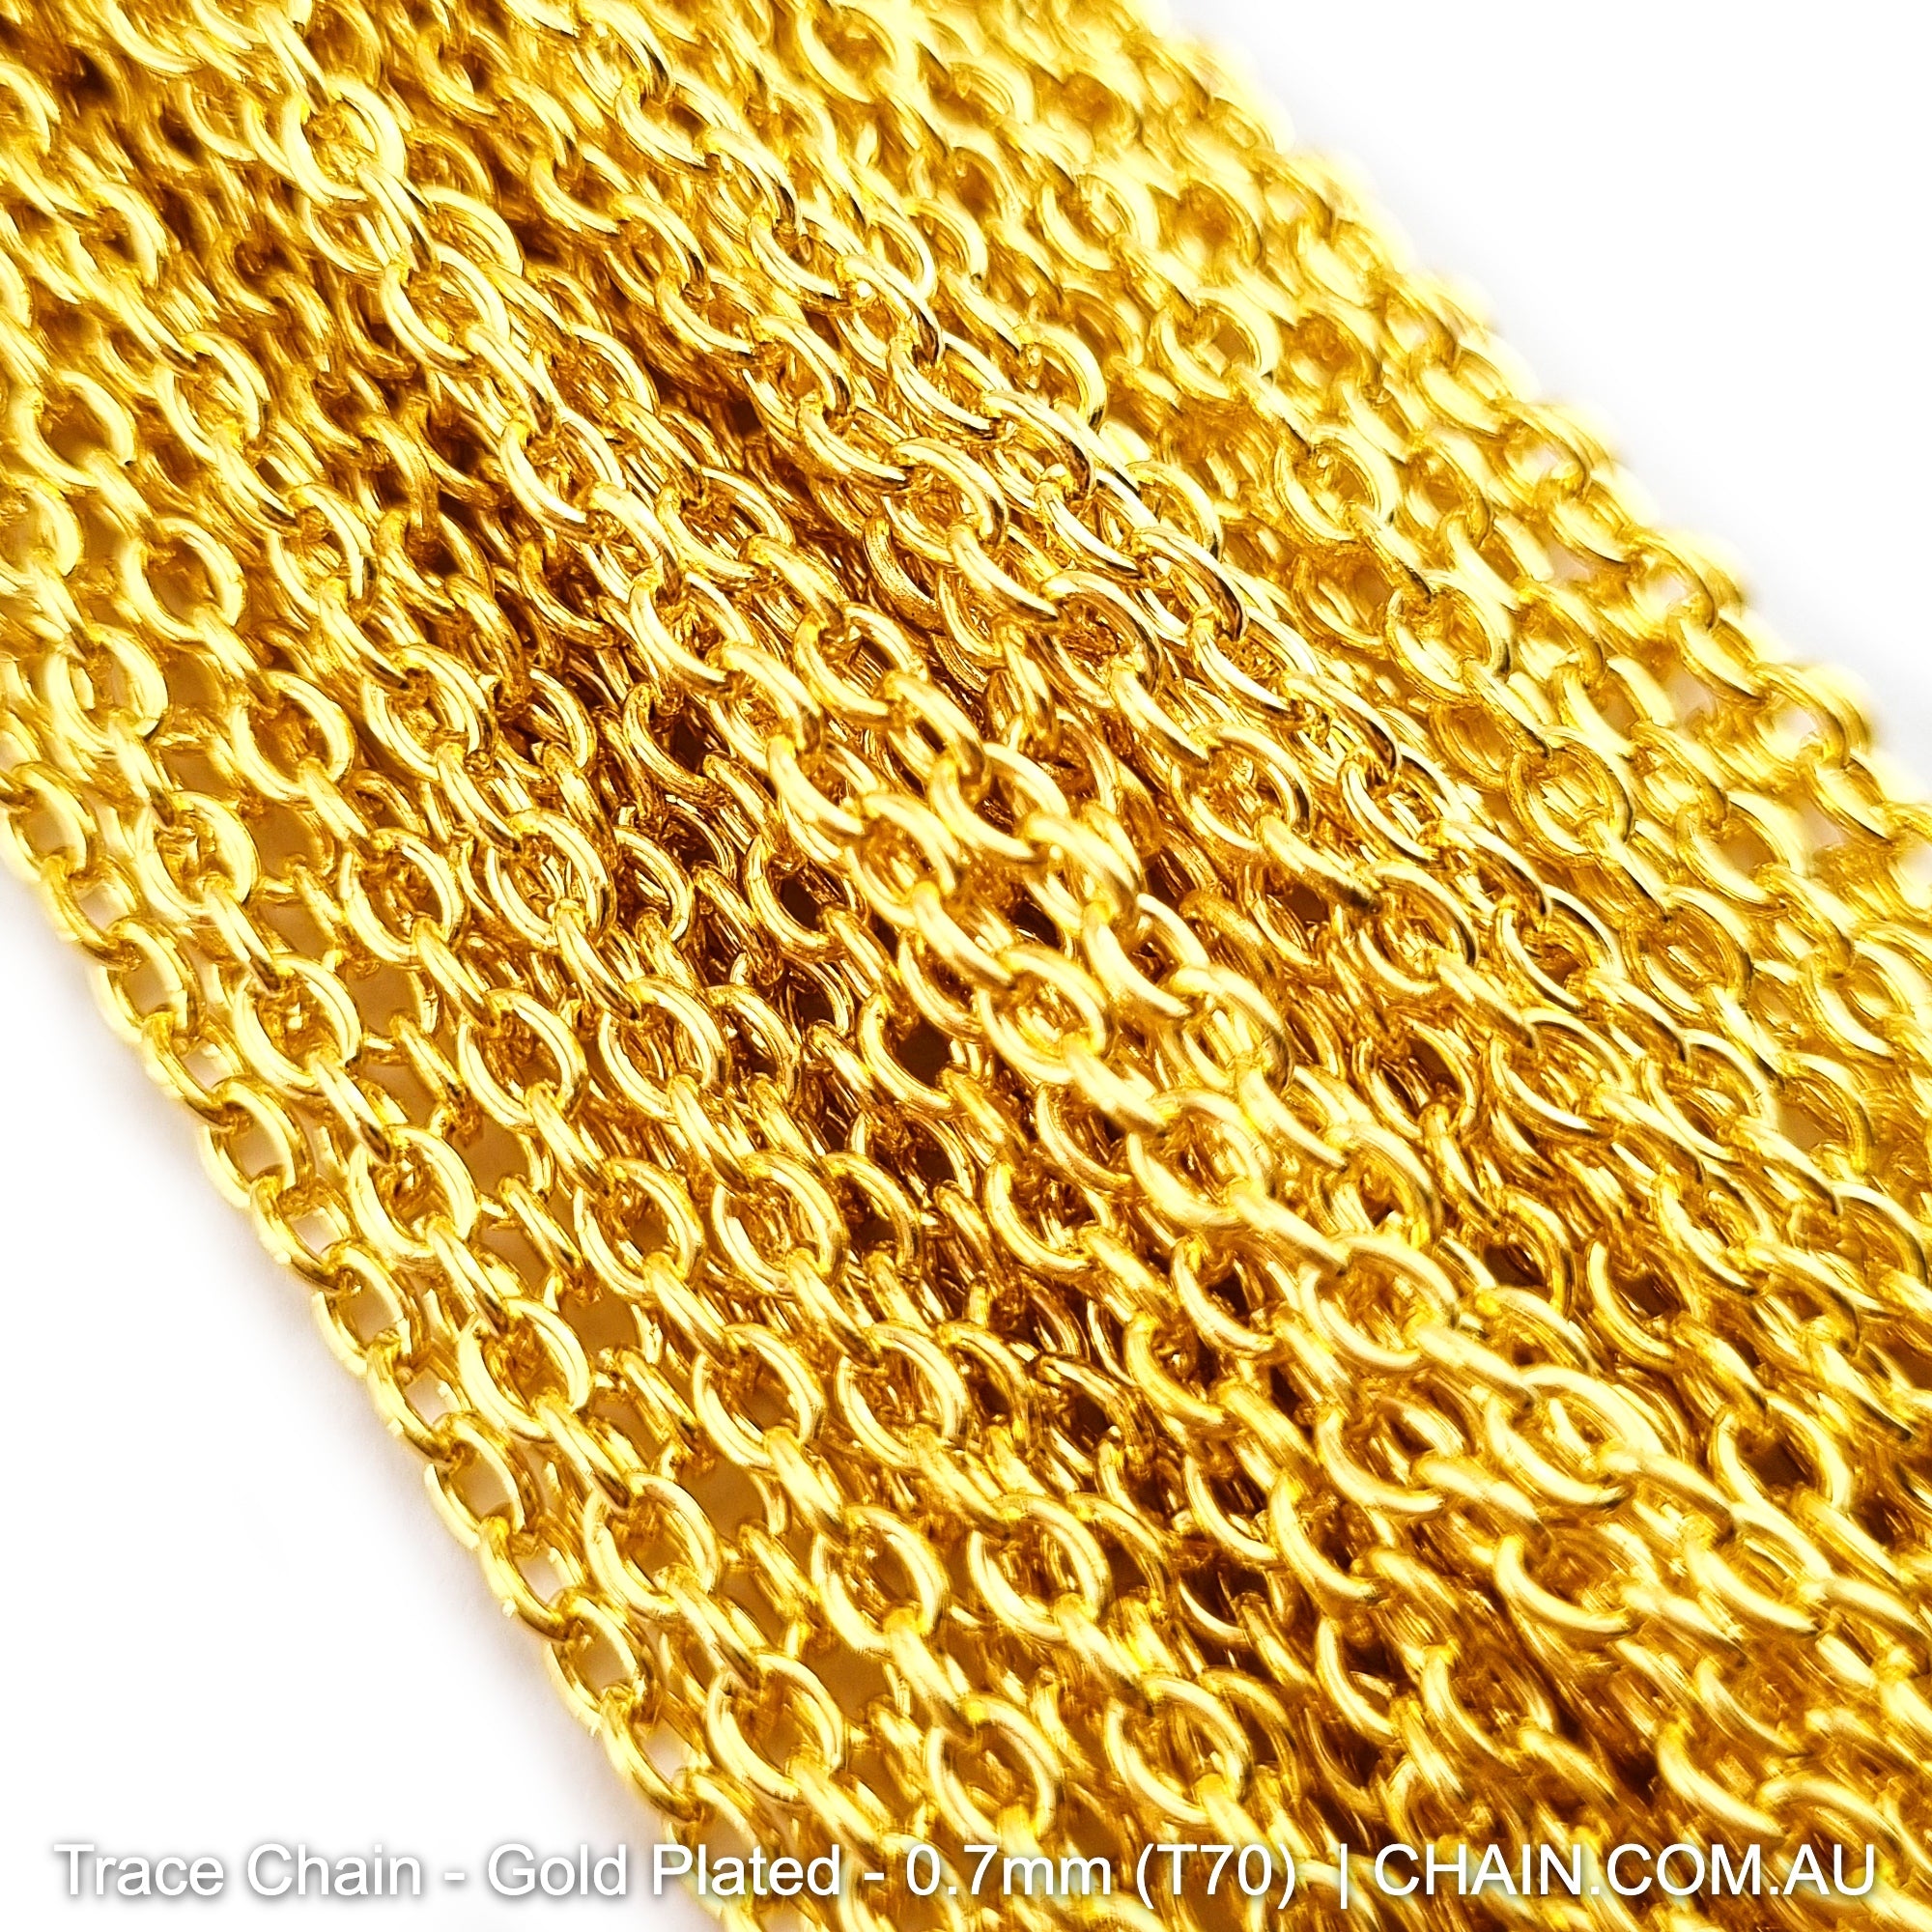 Trace Chain in a Gold Plated Finish. Size: 0.7mm, T70. Jewellery Chain, Australia wide shipping. Shop chain.com.au